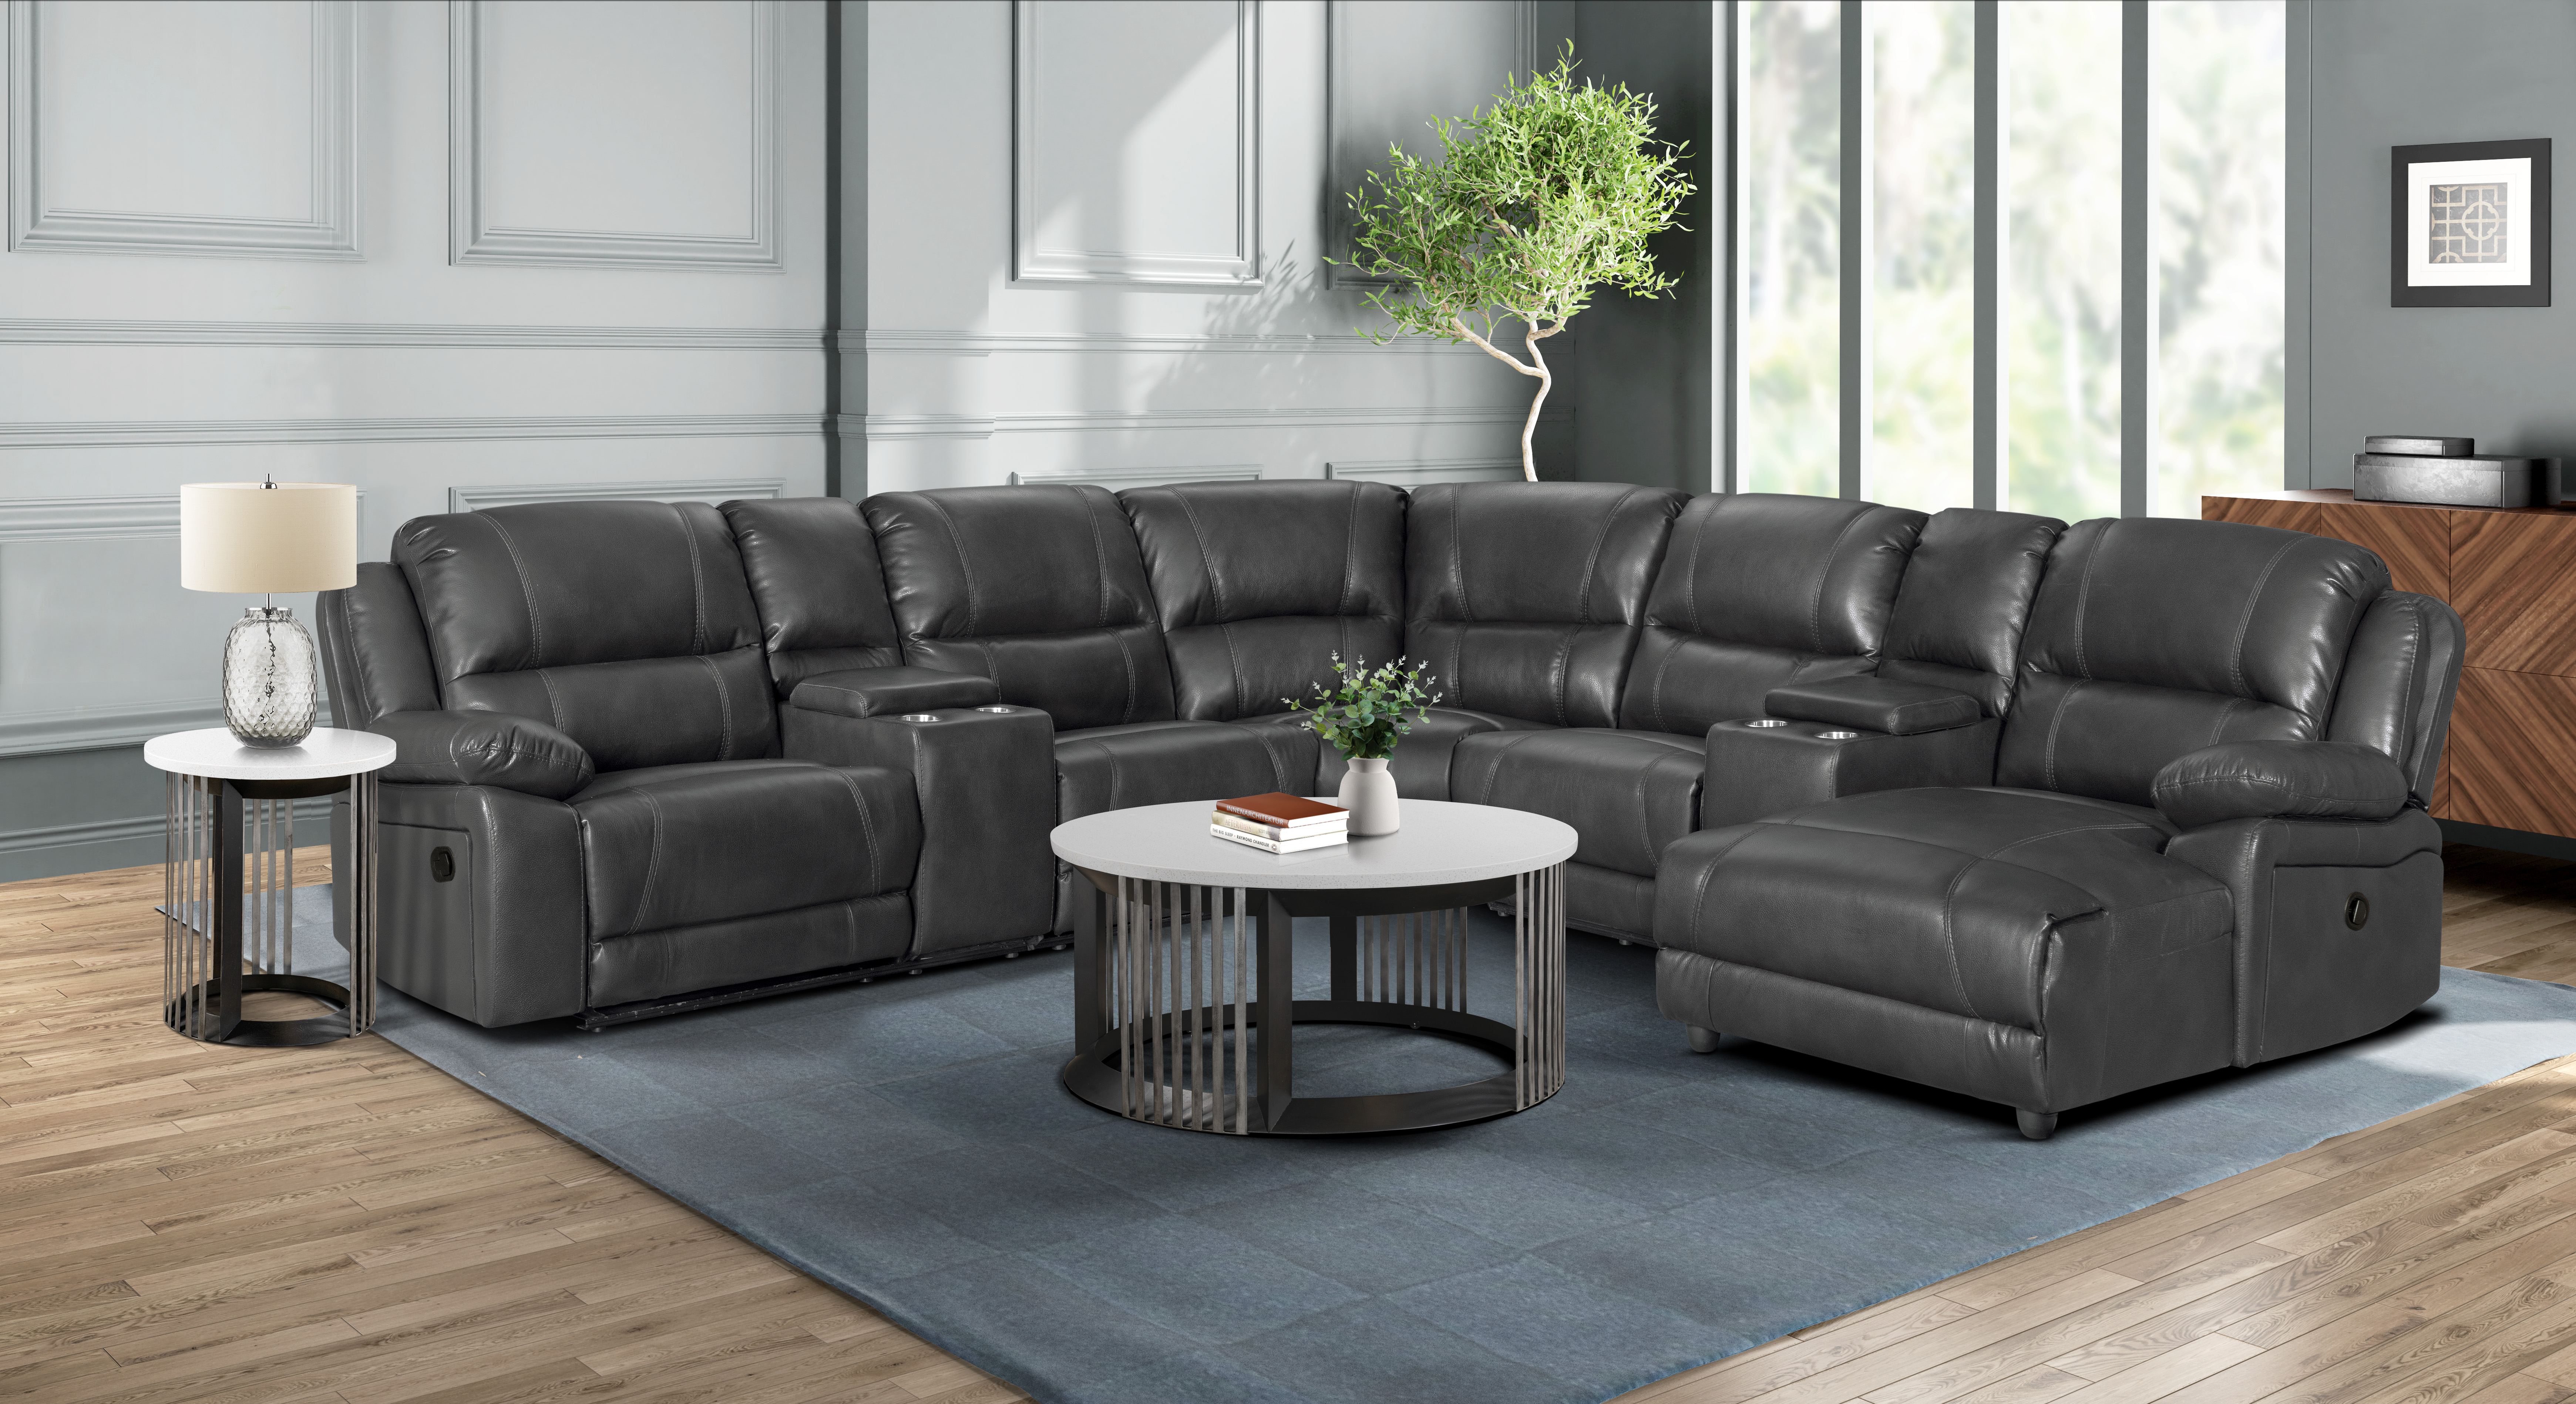 Lane BRENHAM CHARCOAL 4pc Reclining Sectional with FREE 50"TV P09857764